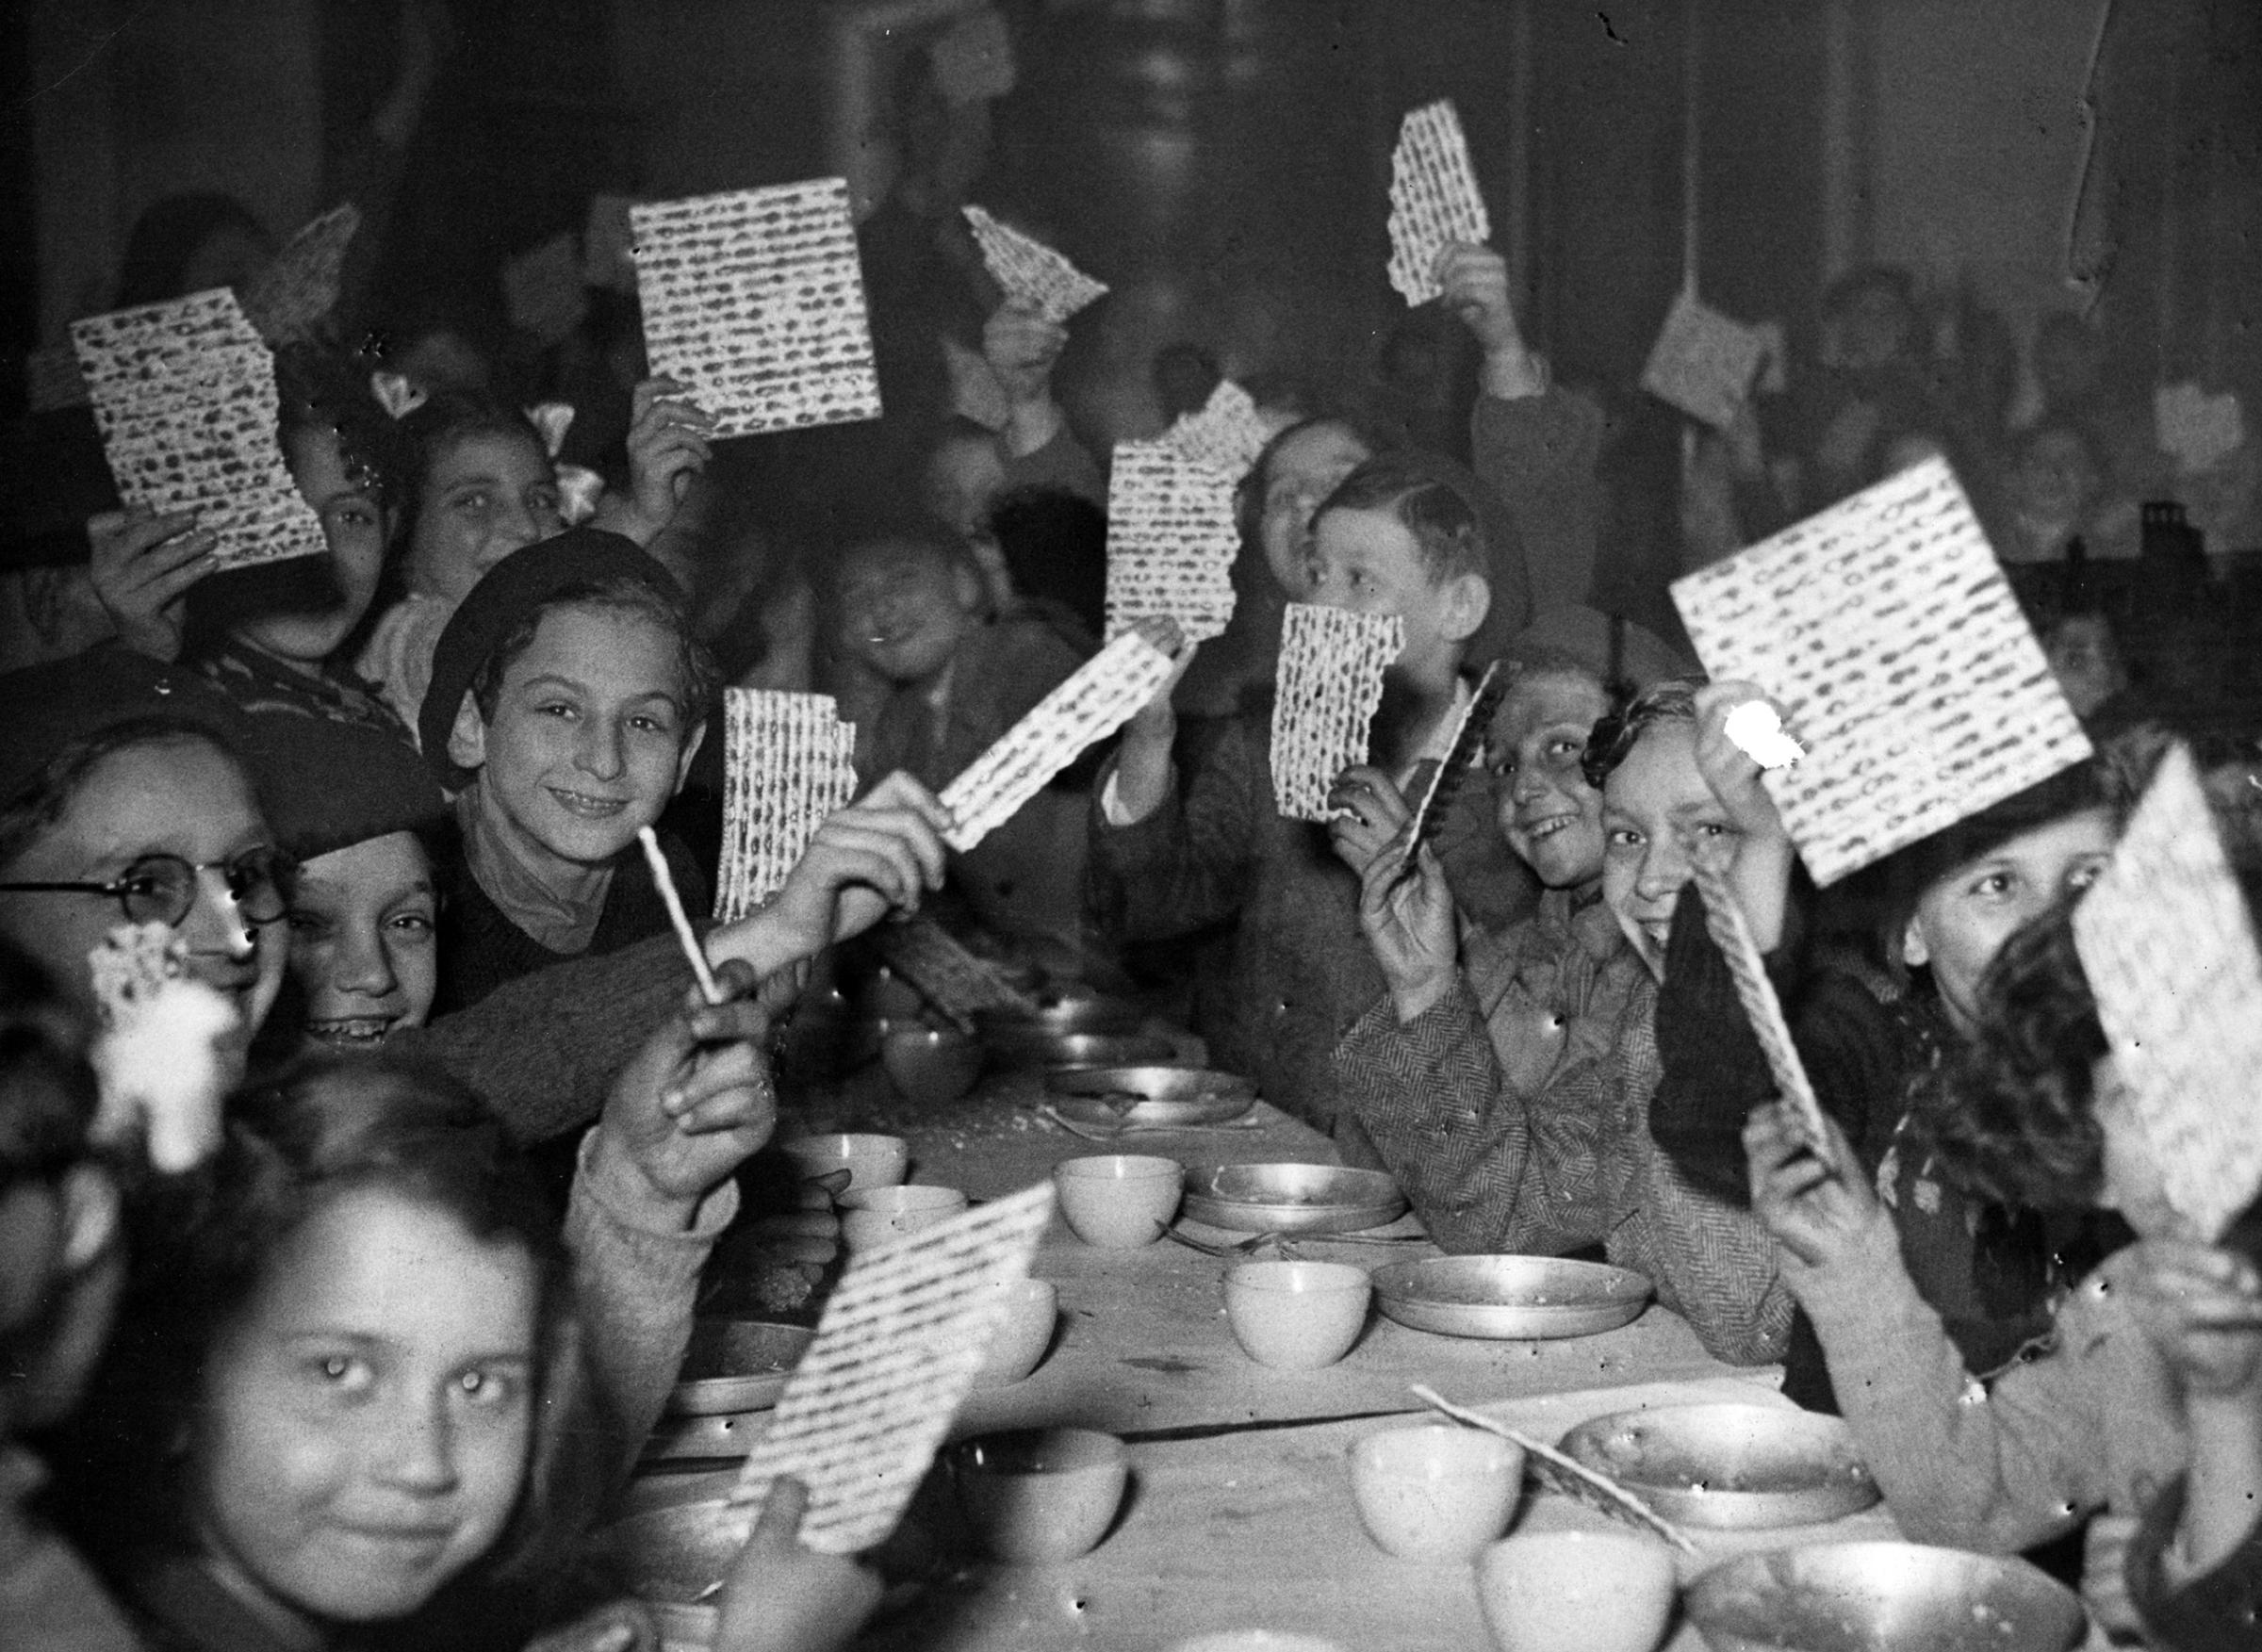 Young refugees at a Passover Seder holding up their matzot with pride at a children's canteen run by the JDC partner Federation des Societes Juives en France. France, c. 1947. Photographer unknown.